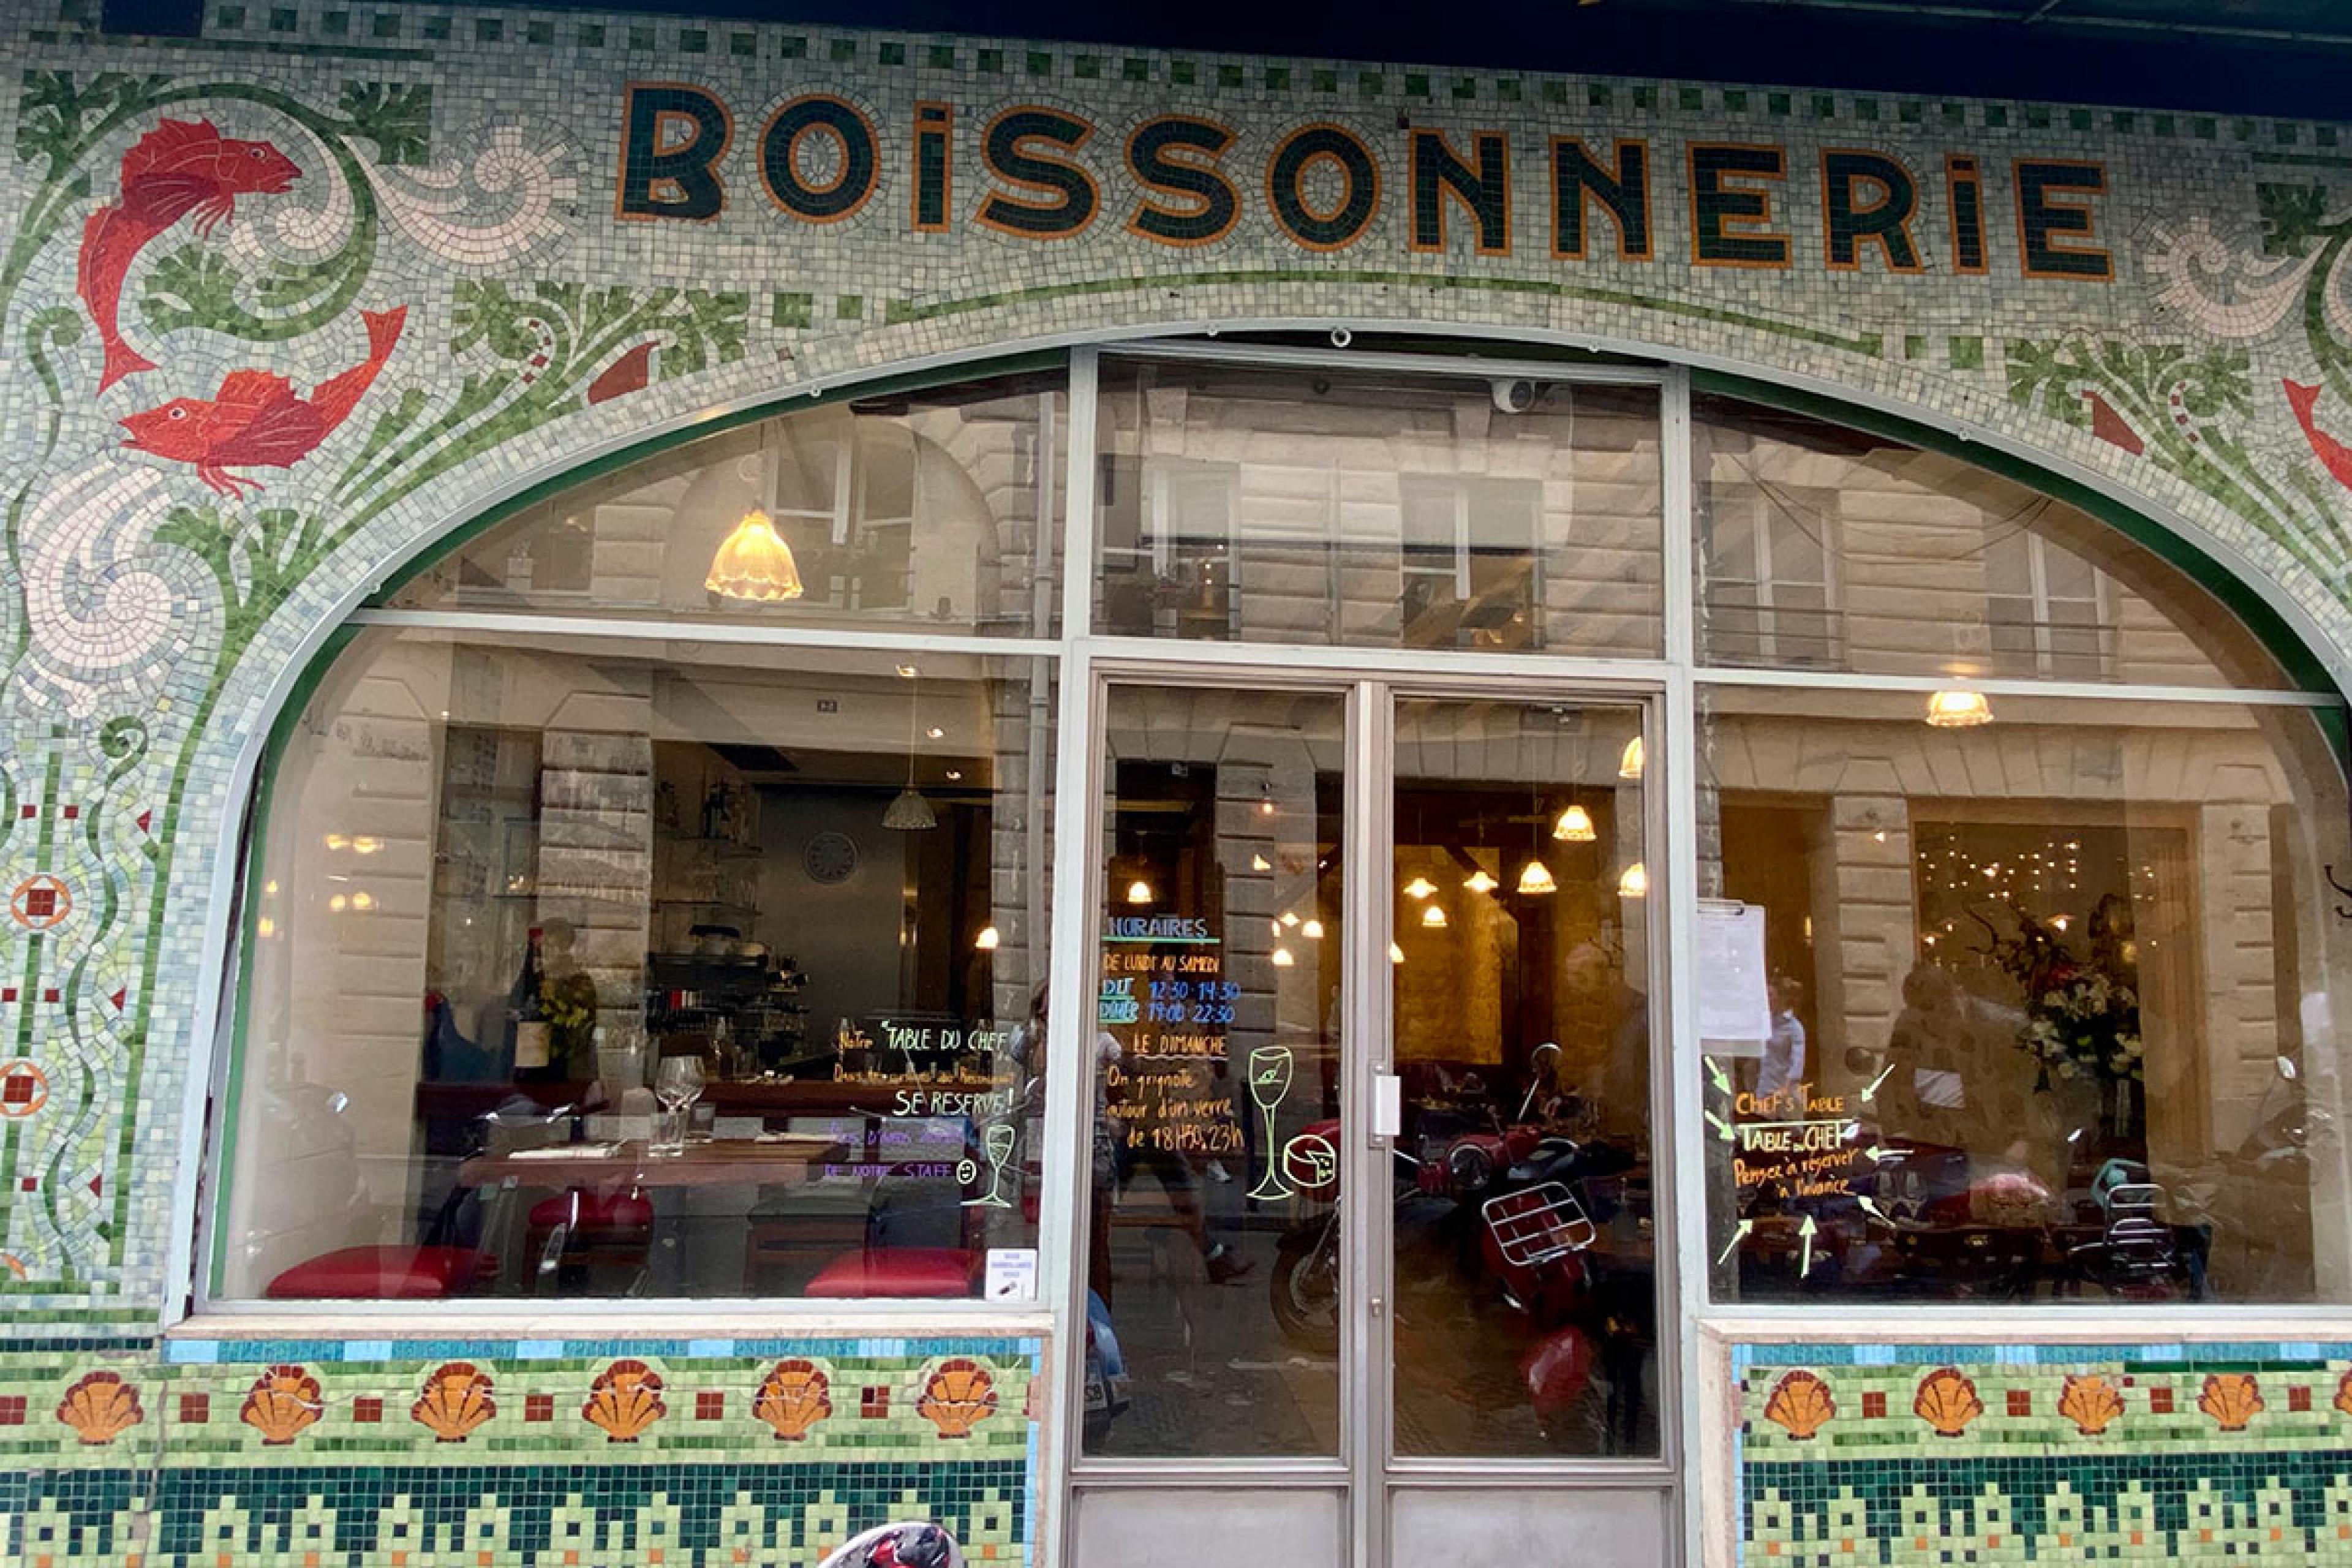 outside french restaurant in paris with sign saying boissonnerie